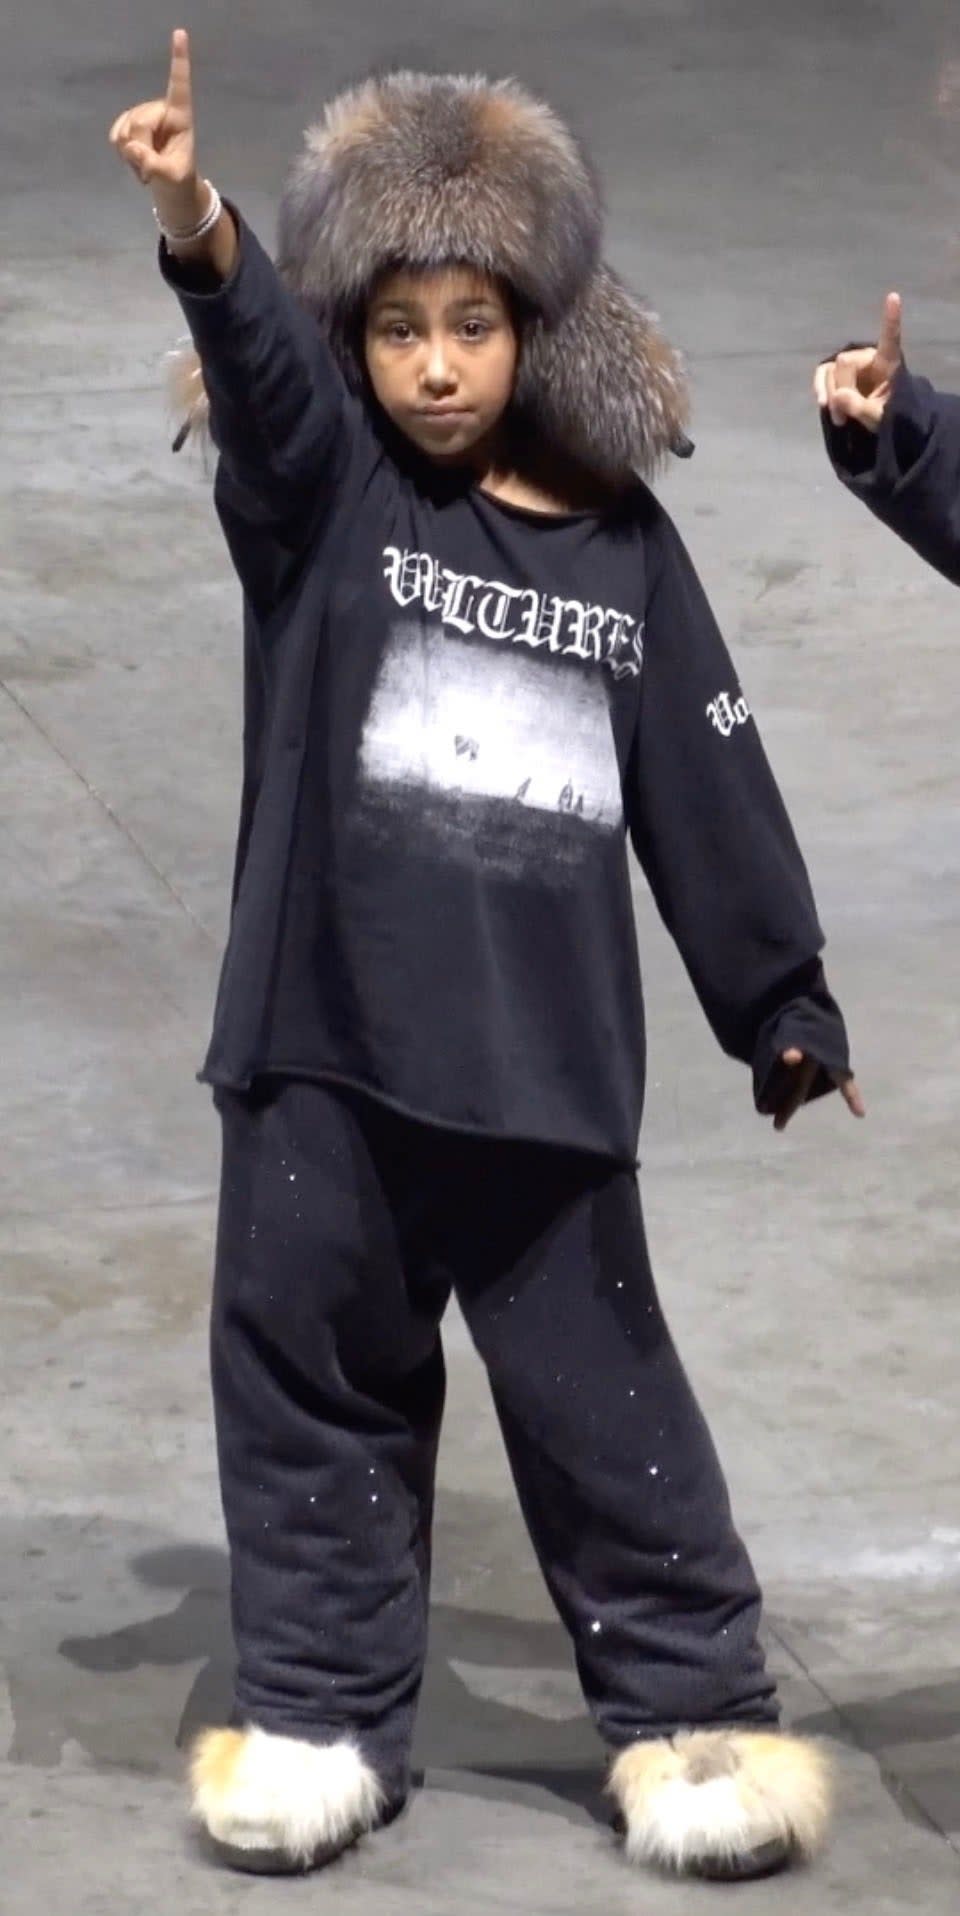 North West performed in San Francisco with her father Kanye West on March 12.